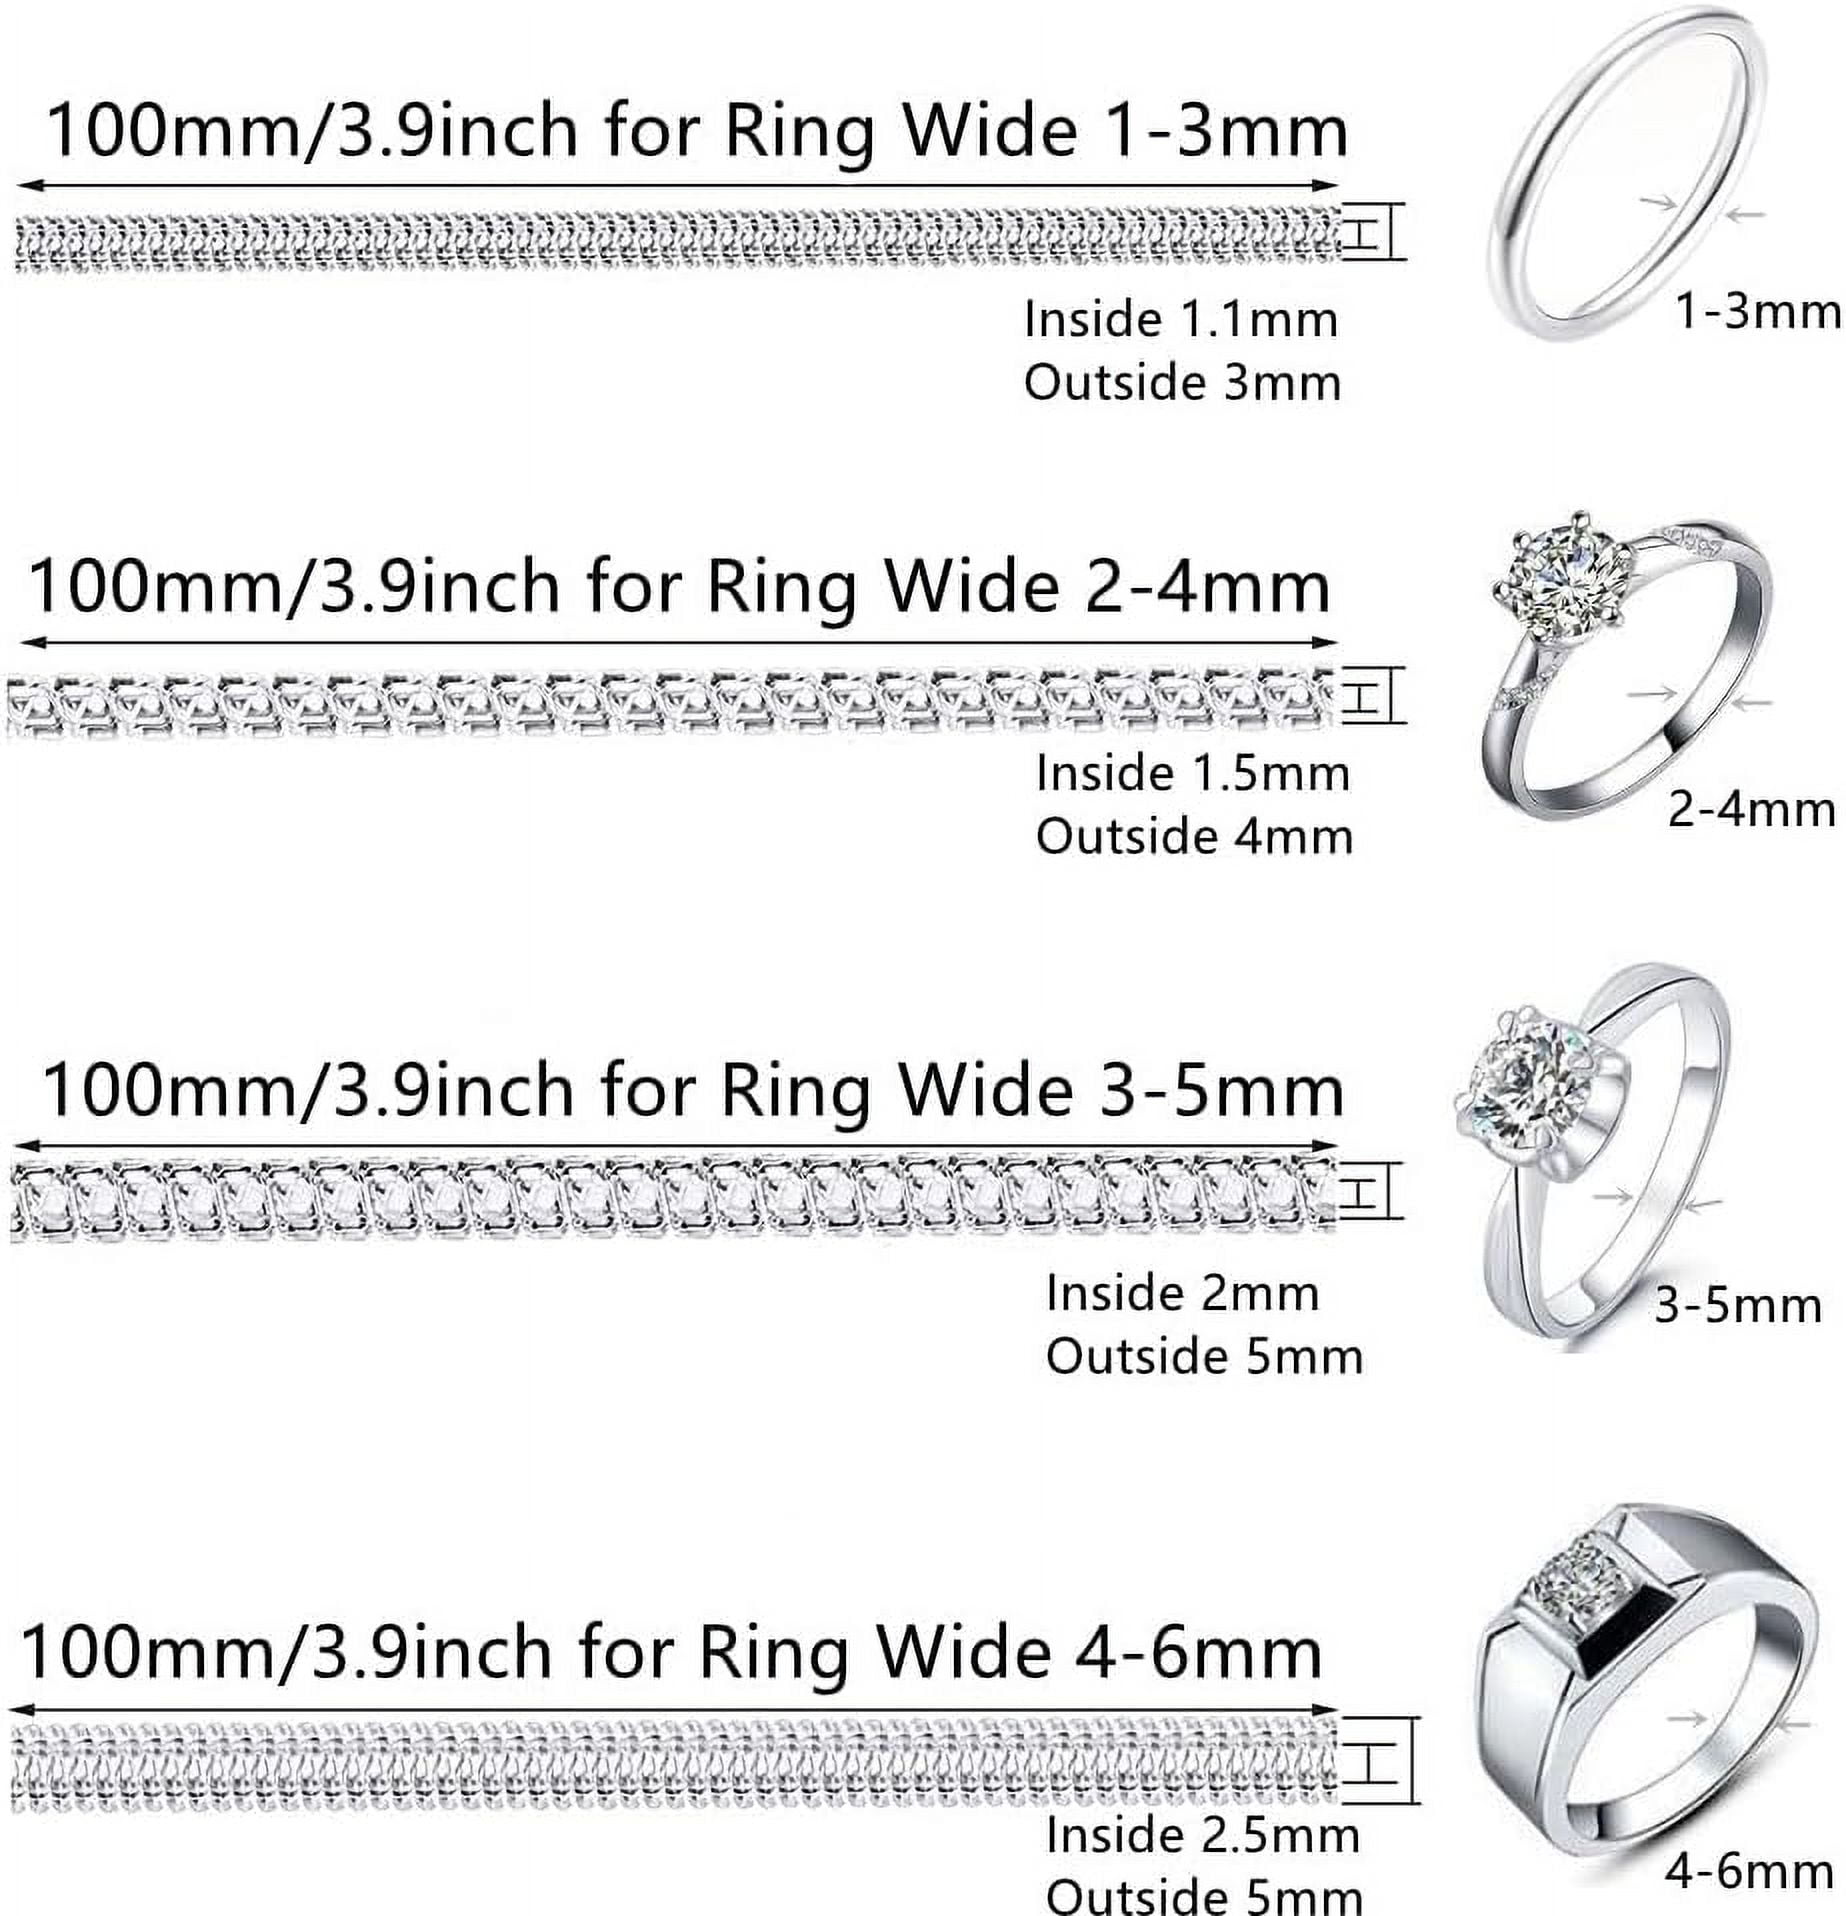 Ring Size Adjuster for Loose Rings, Eiito Ring Sizers Ring Spacers